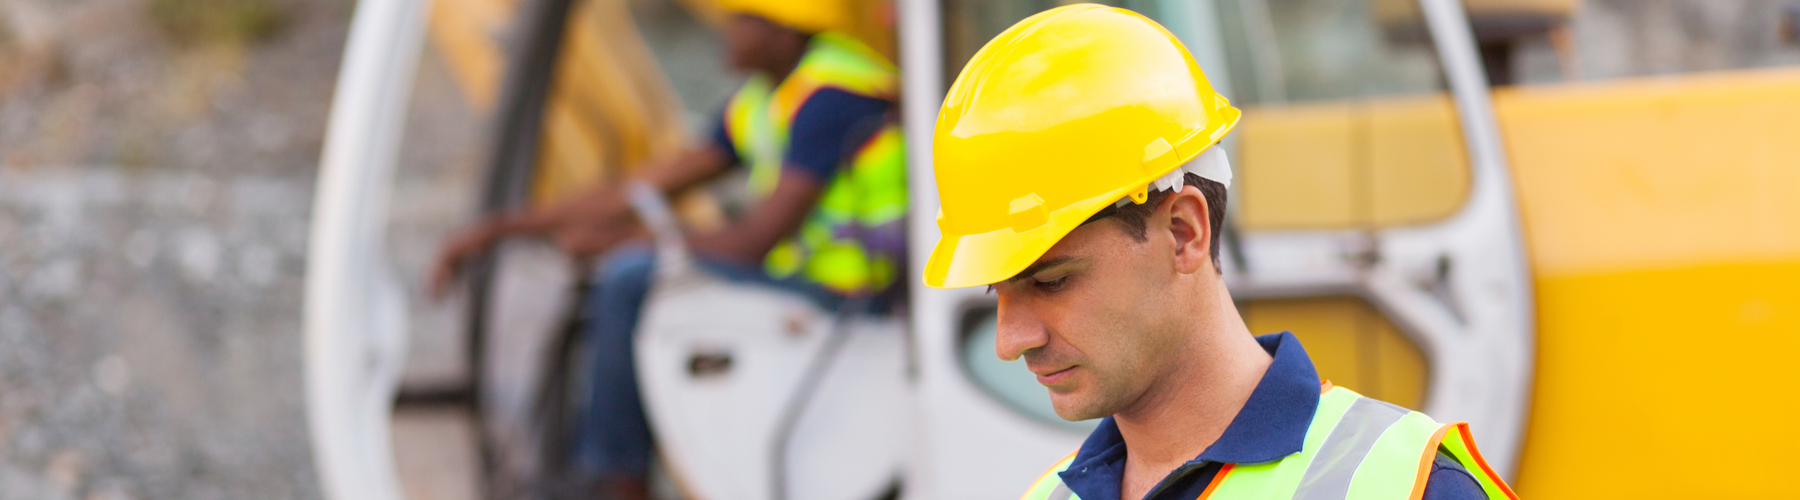 The Importance of Safety on Construction Sites